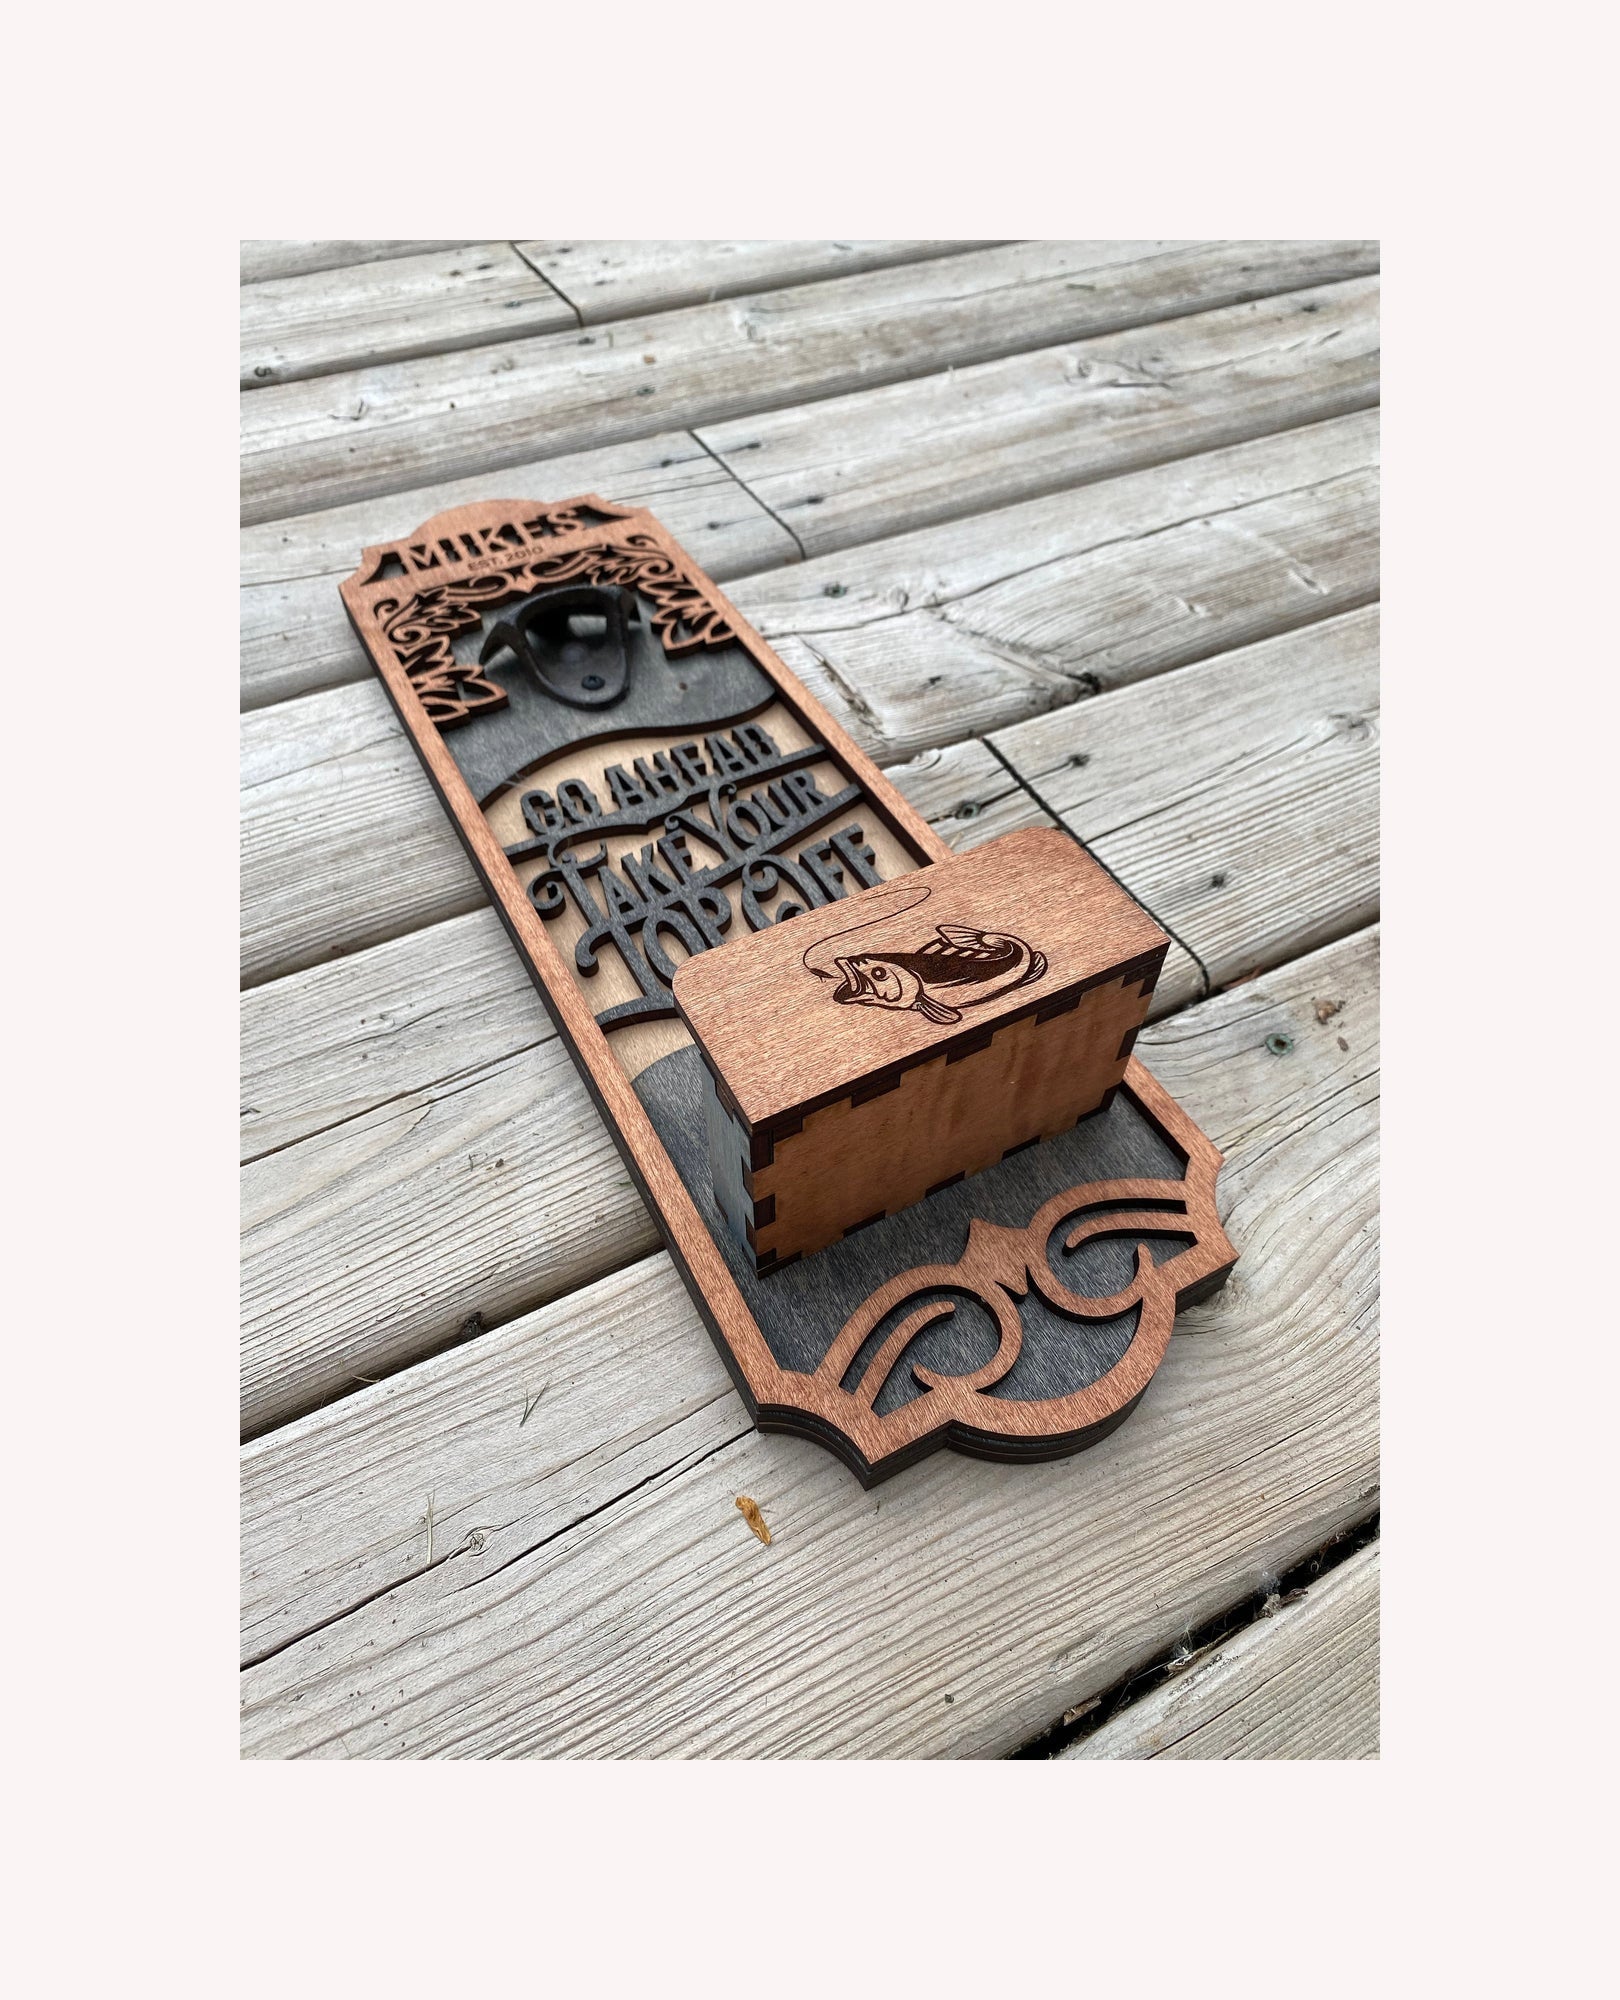 Personalized Wooden Wall Mounted Bottle Opener Sympathy Gift